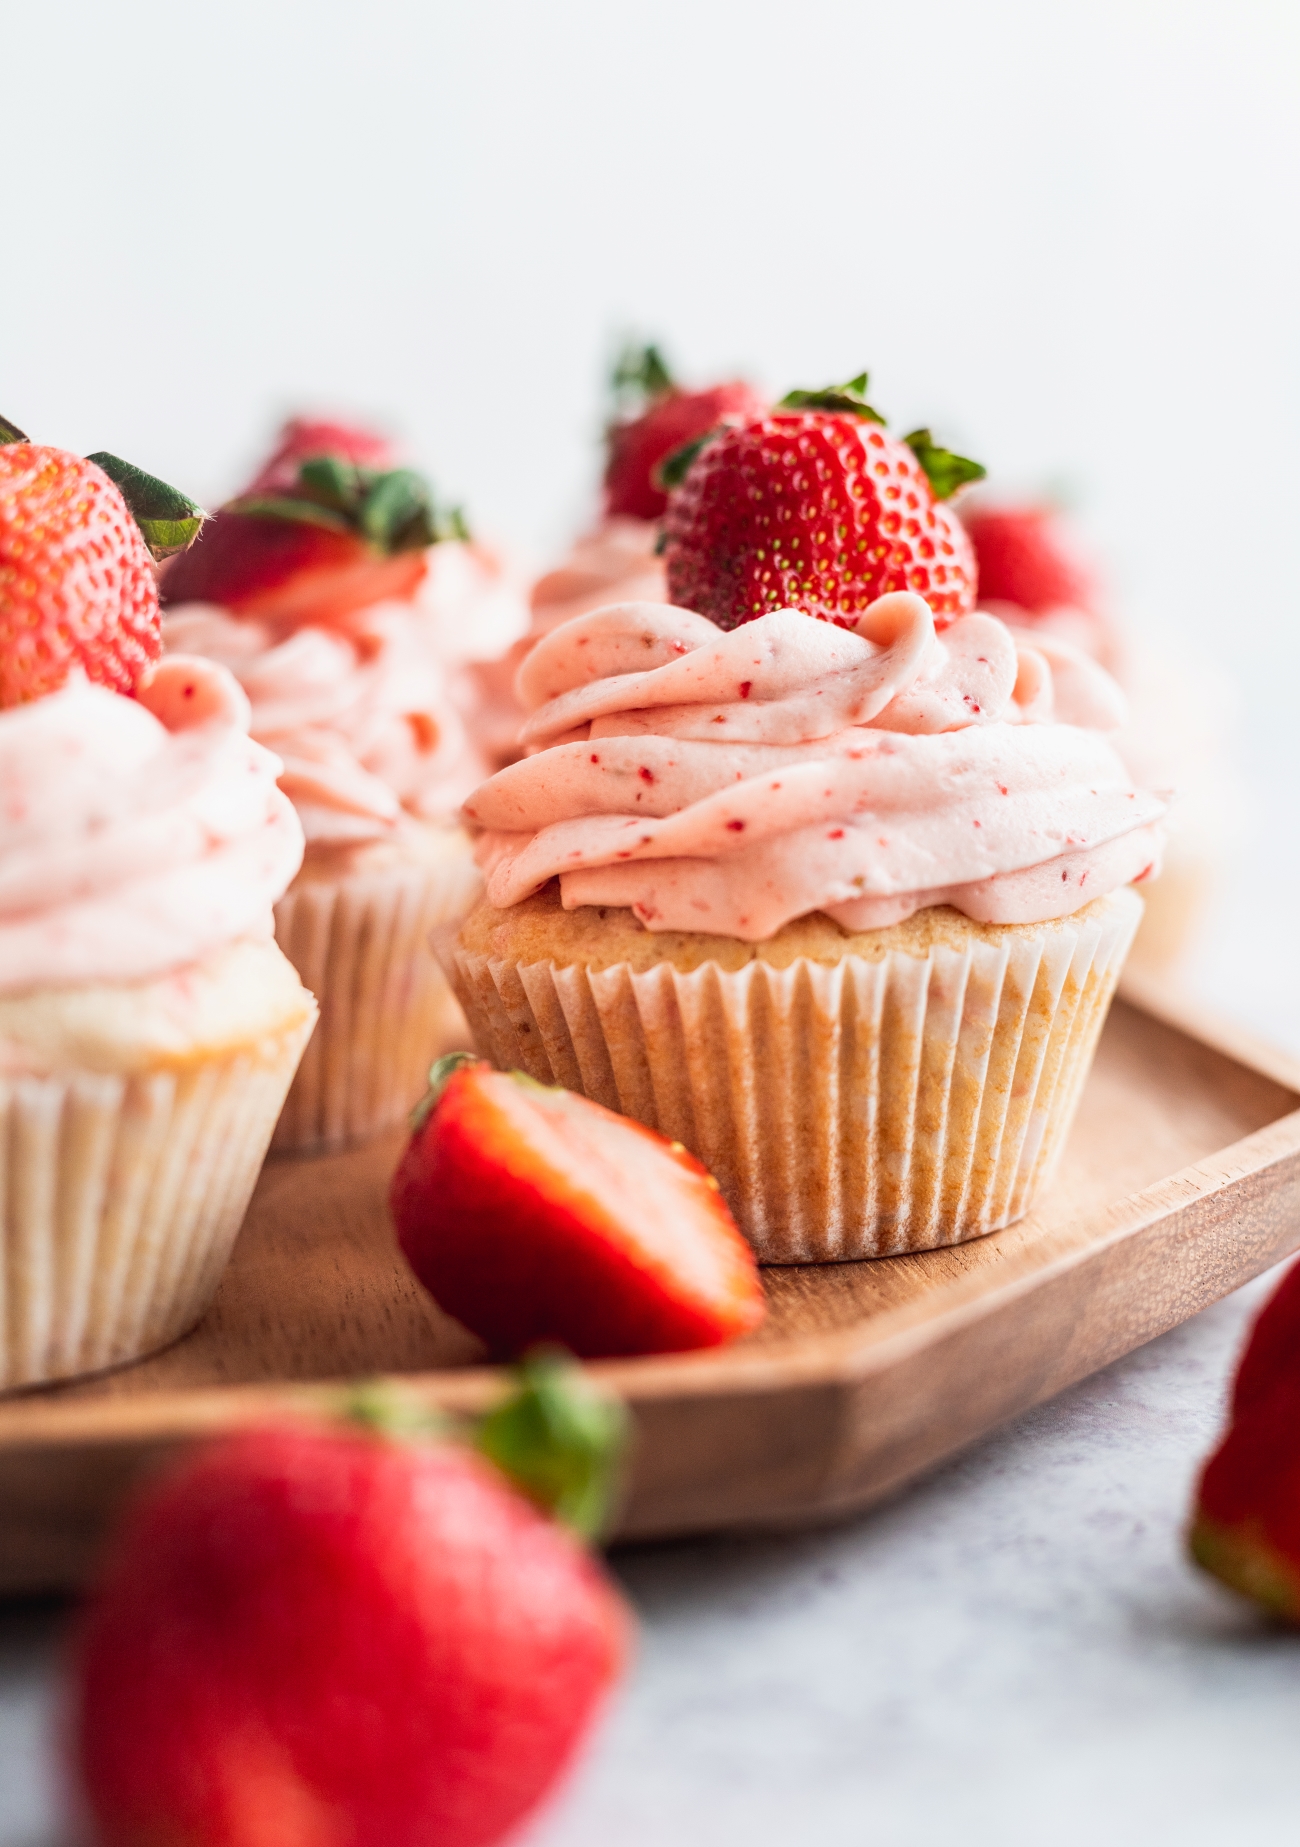 Strawberry filled cupcakes on a wooden platter.